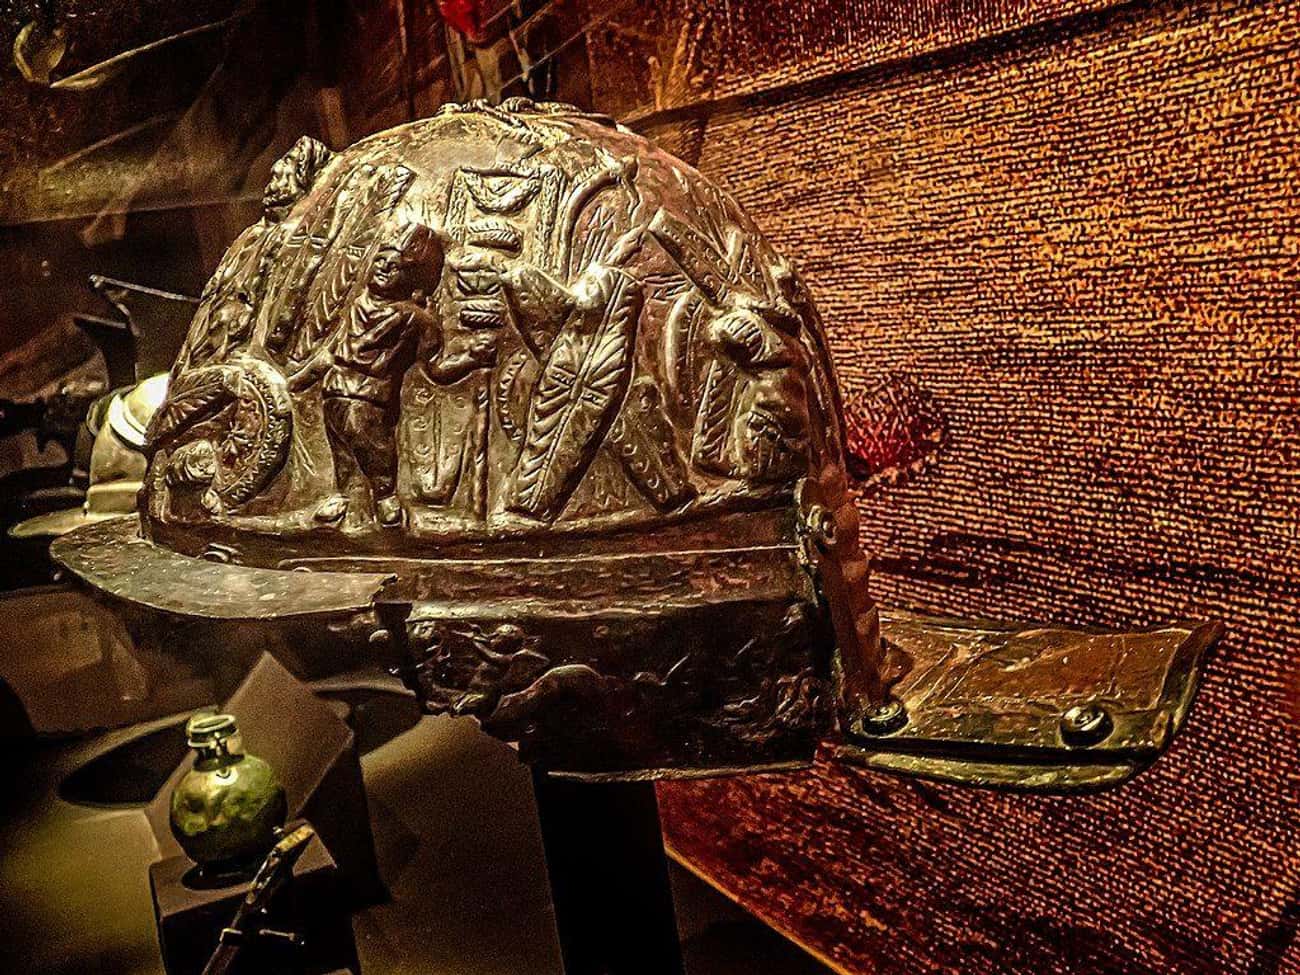 A Decorated Helmet Found In The Gladiator Barracks